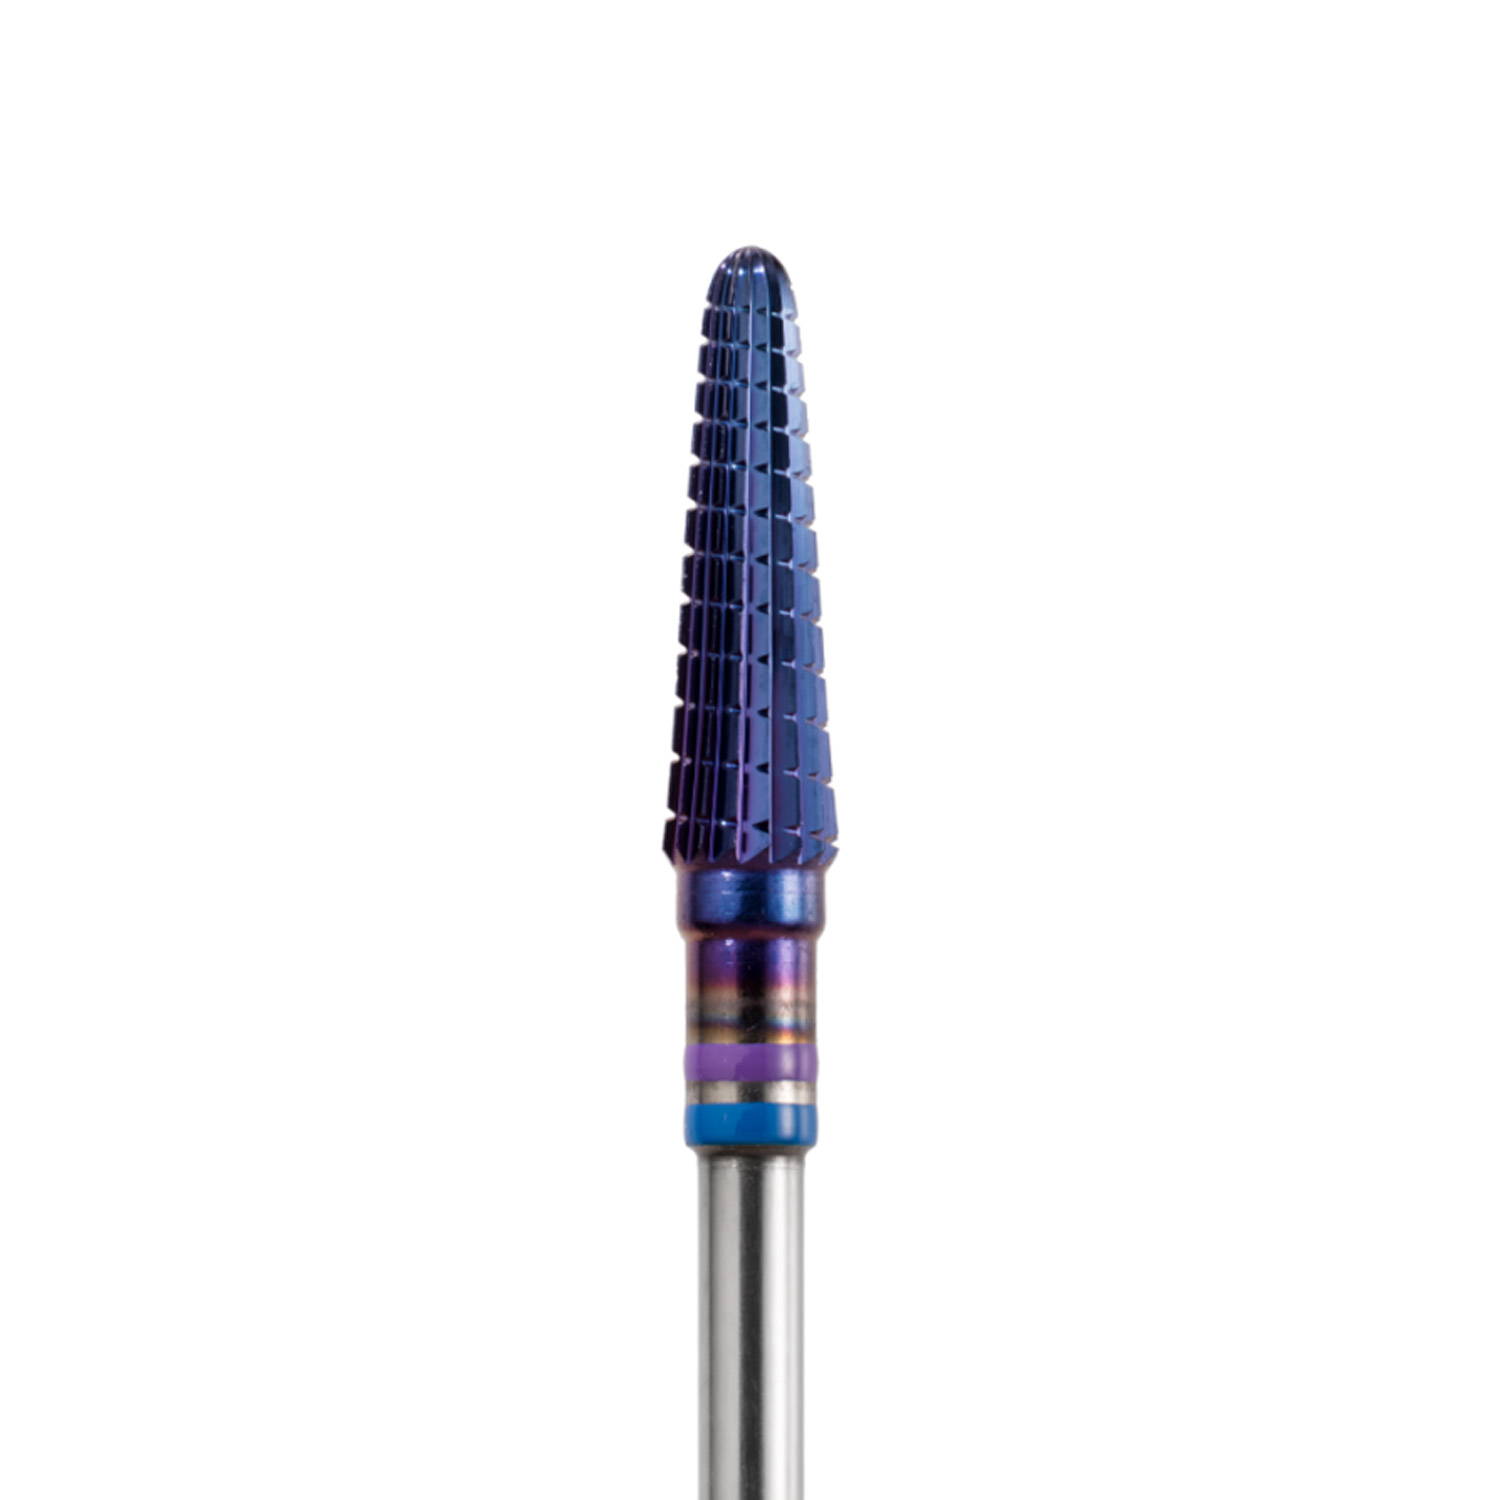 Acurata lamellas toothing fine with cross cut and PVD-coating - AC-237 ACURATA - Carbide Instrument PVD line